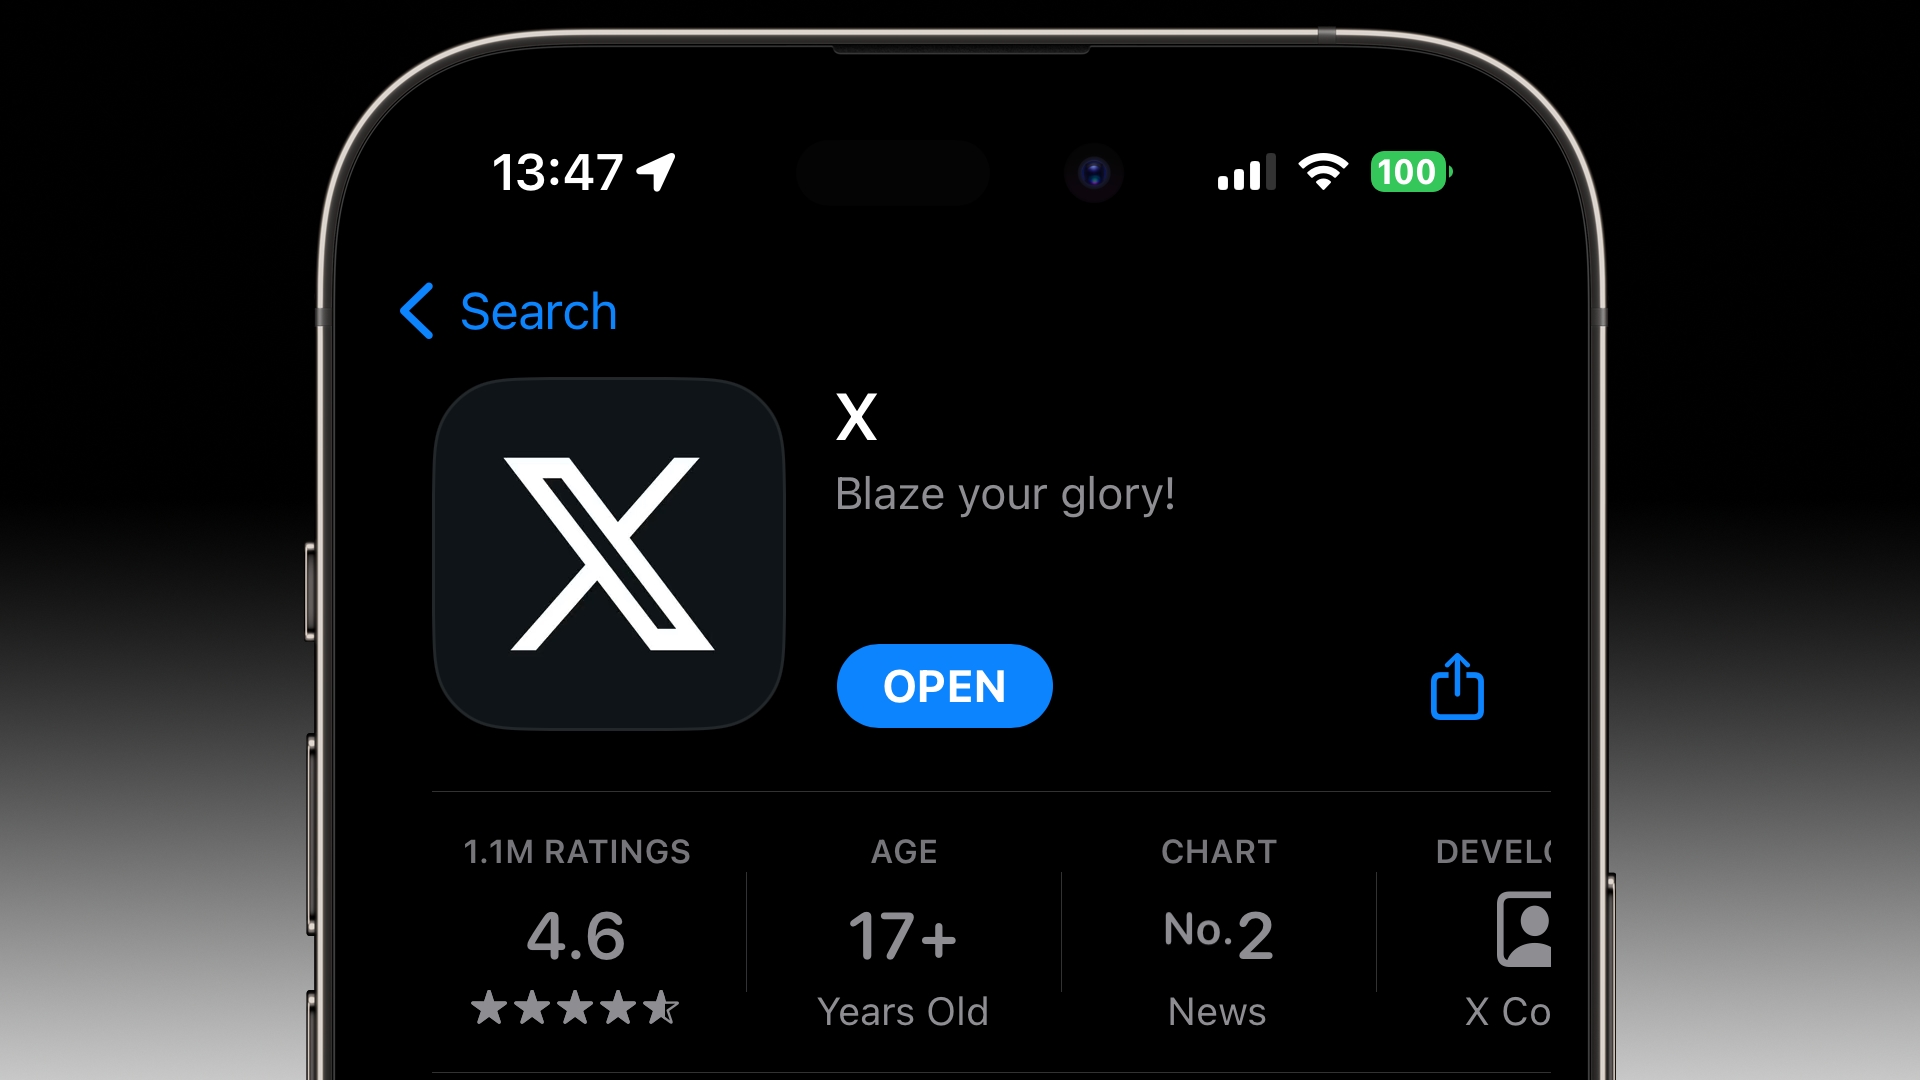 Twitter Finally Turns to 'X' on Apple's App Store